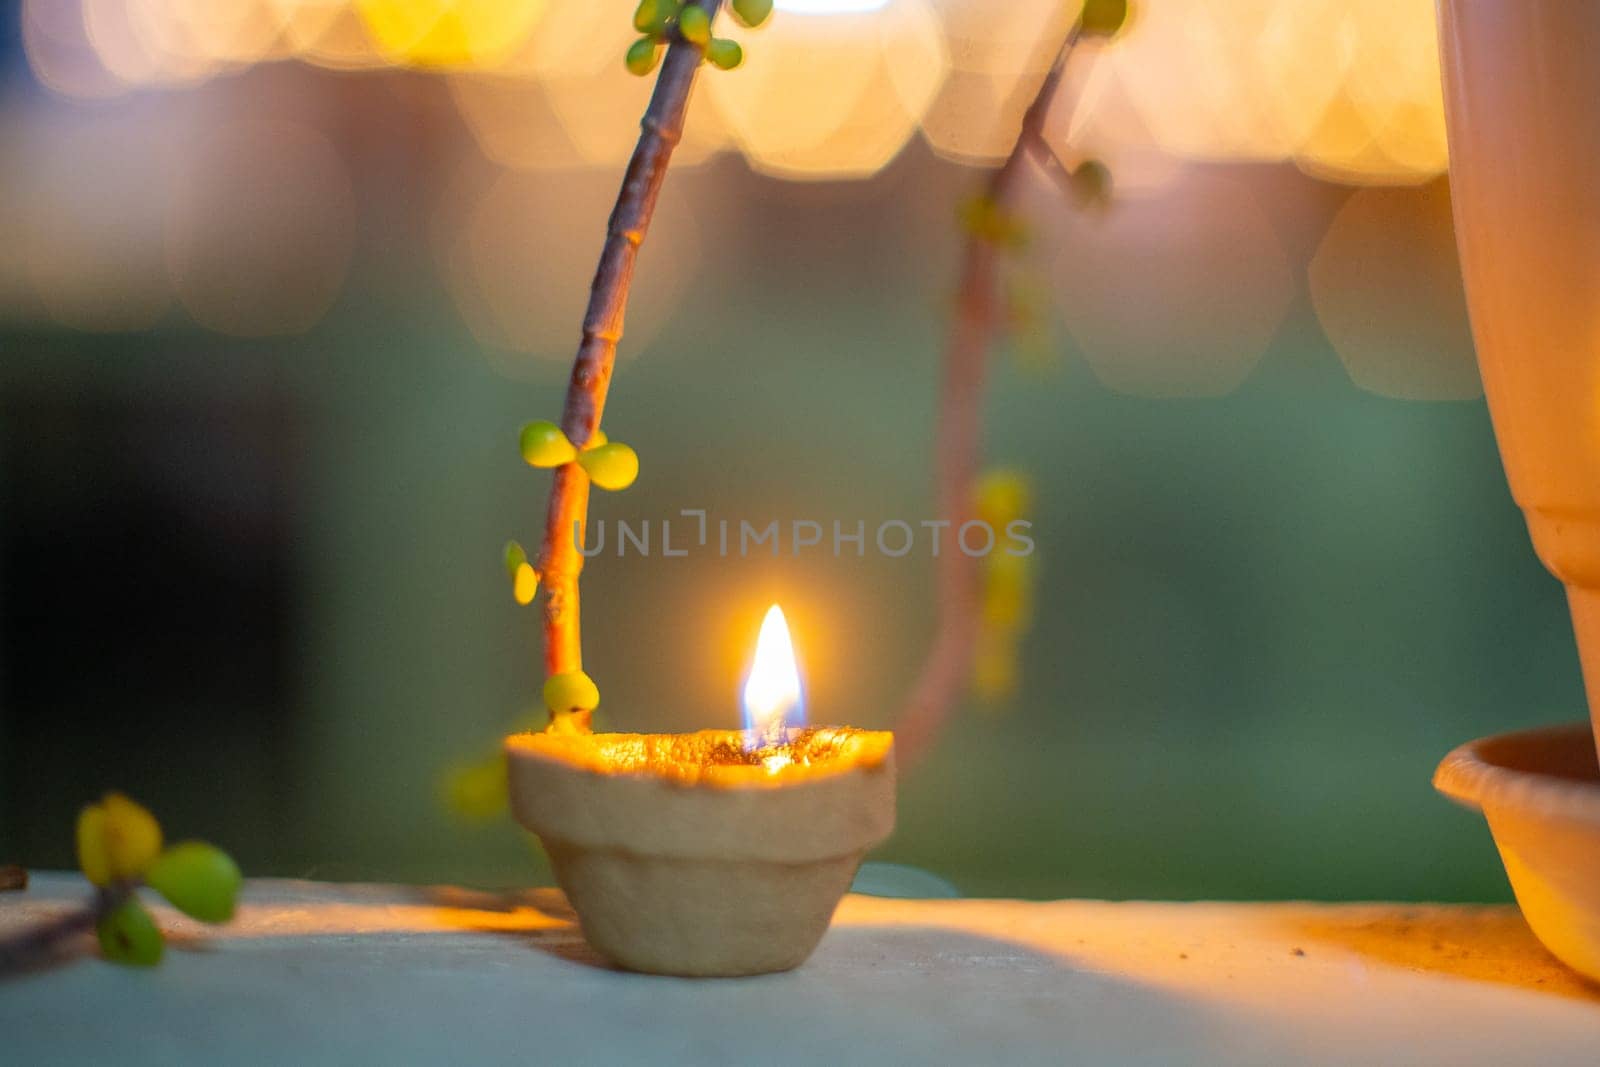 Organic diya lamp made of organic coconut fiber filled with oil and lit to provide light and as an offering to the hindu gods on the festival of diwali India